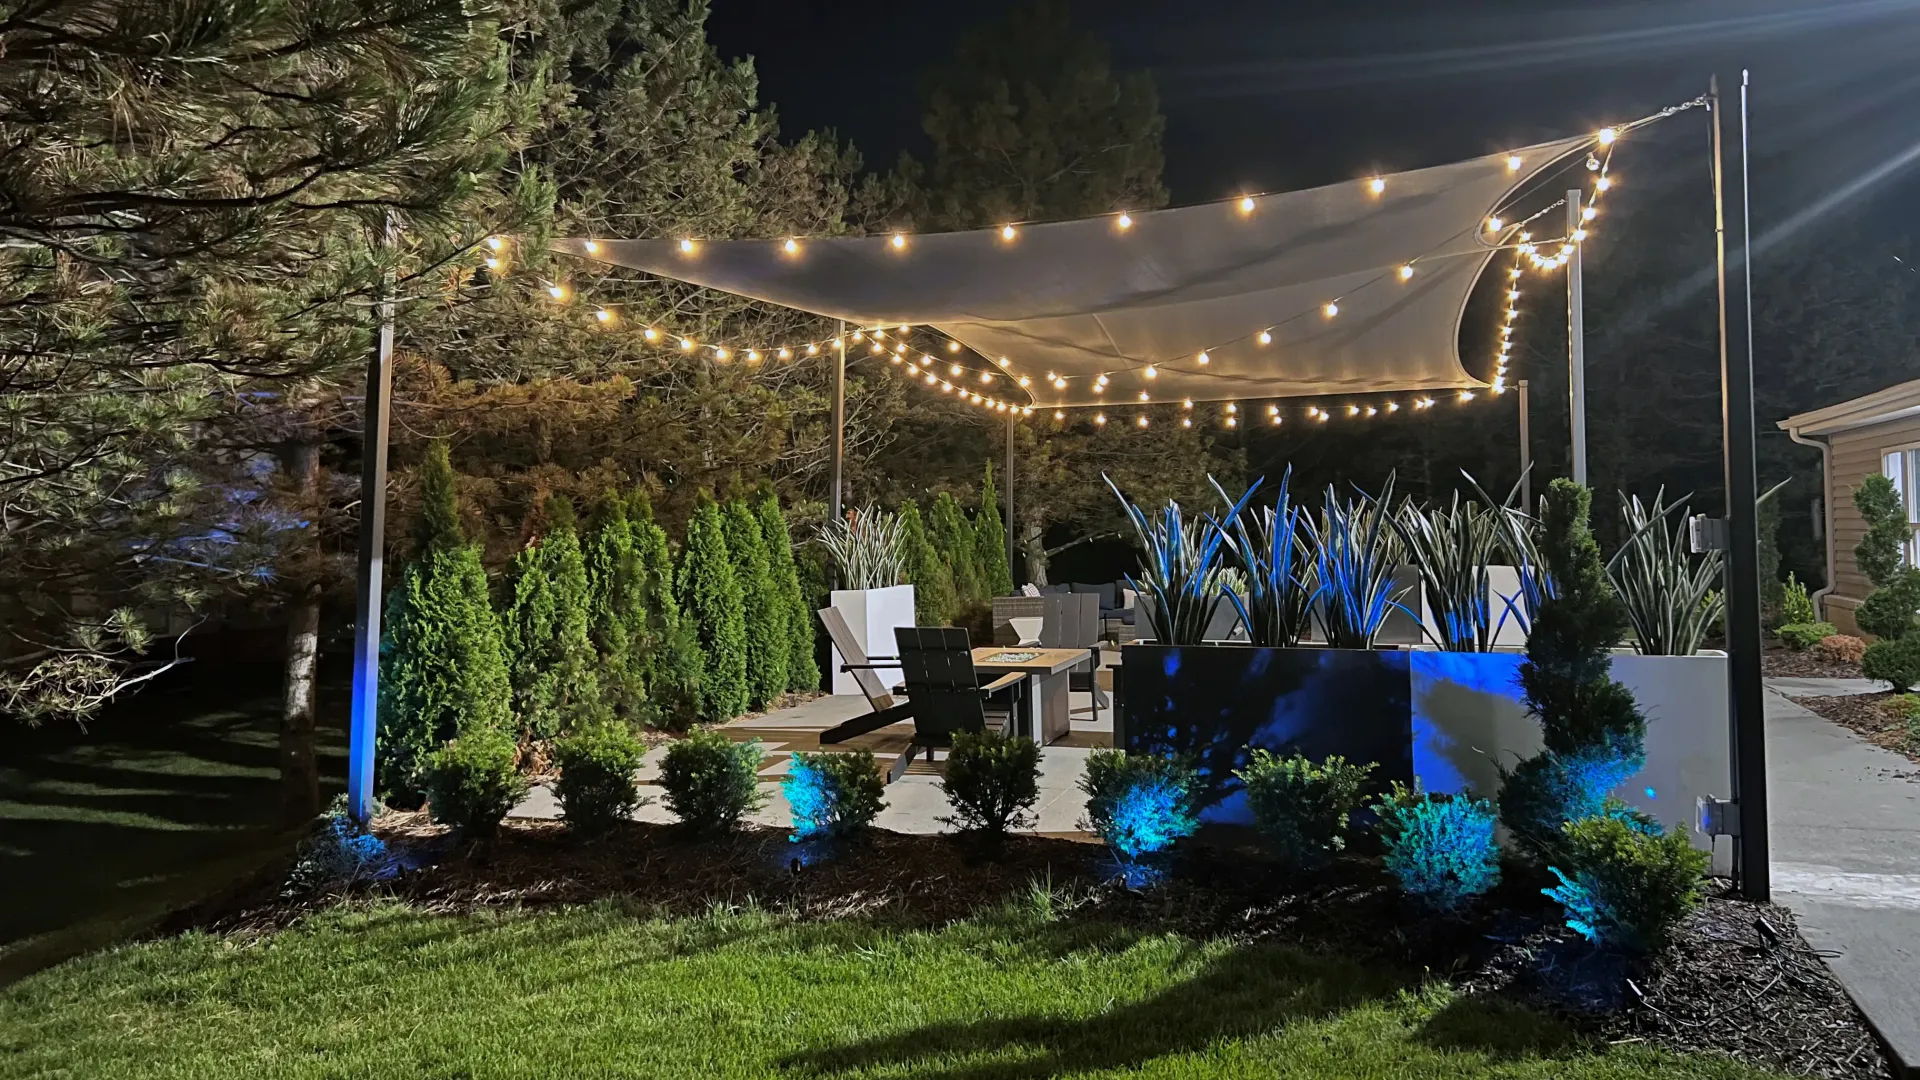 Outdoor lounge at night, bistro lighting and blue landscape uplighting create a serene ambiance for relaxation under the night sky.